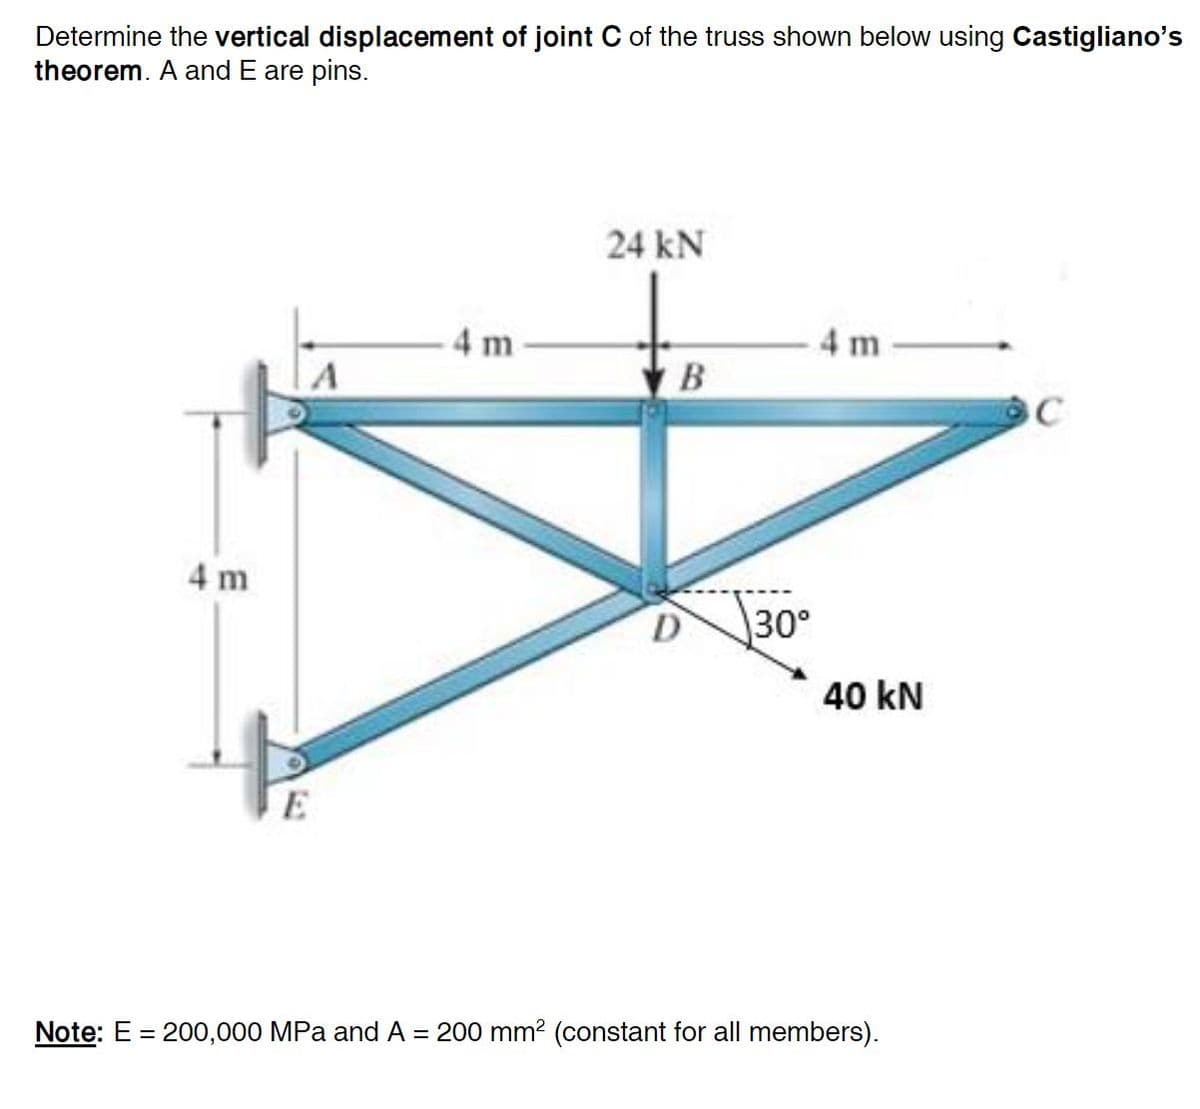 Determine the vertical displacement of joint C of the truss shown below using Castigliano's
theorem. A and E are pins.
4 m
E
4 m
24 kN
B
D
30°
4 m
40 kN
Note: E = 200,000 MPa and A = 200 mm² (constant for all members).
C